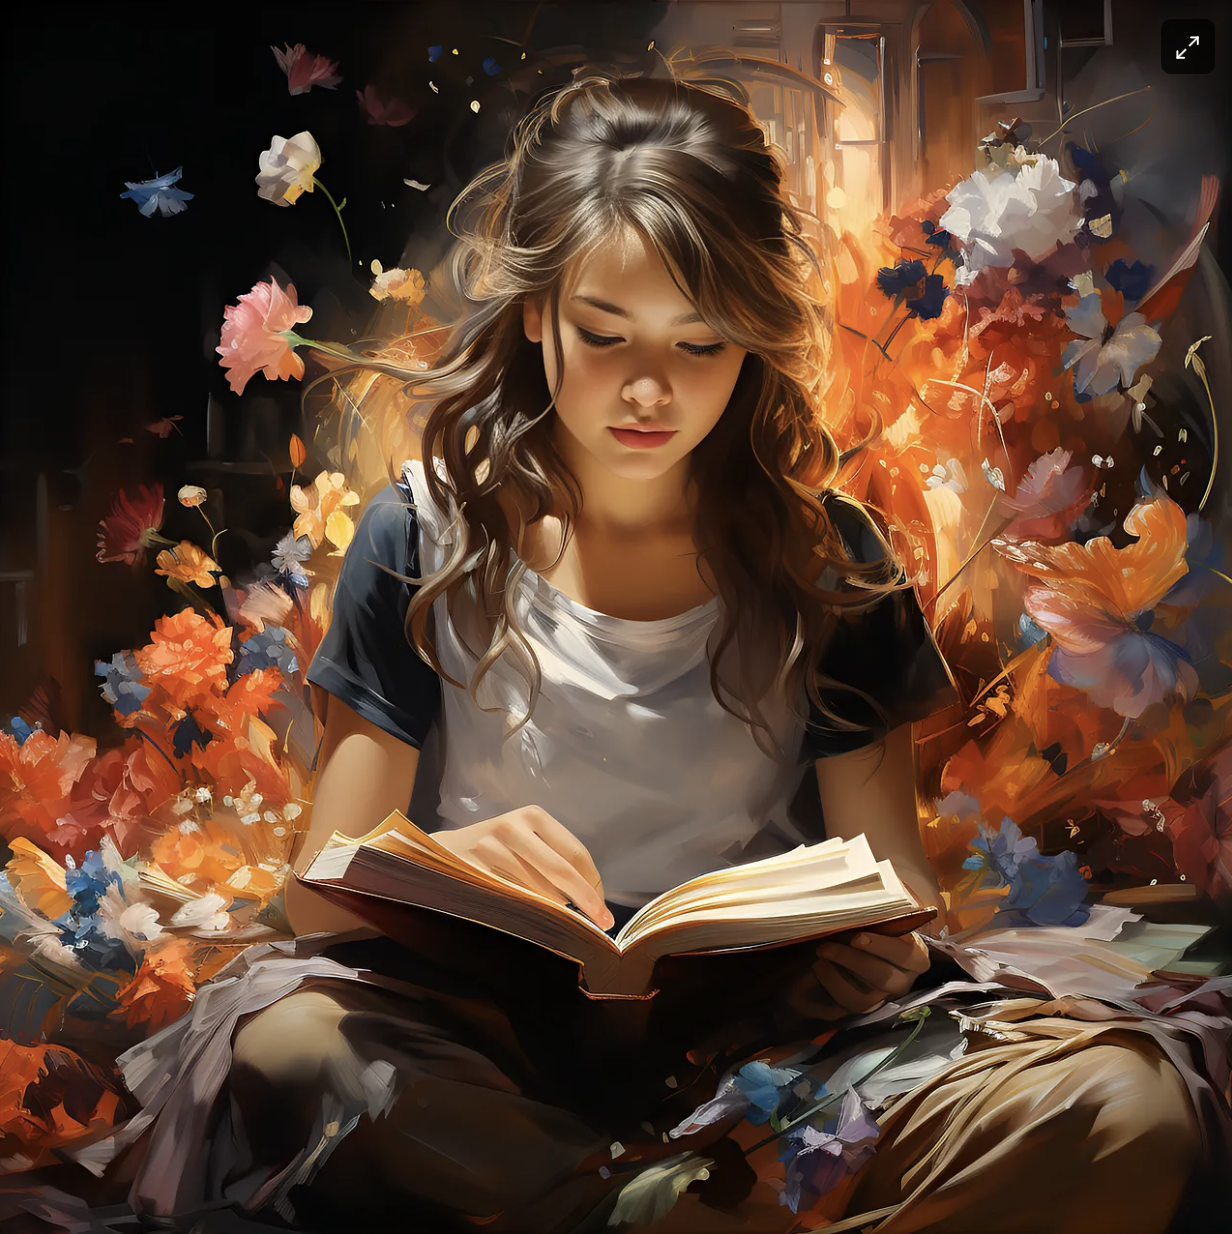 painting - girl reading